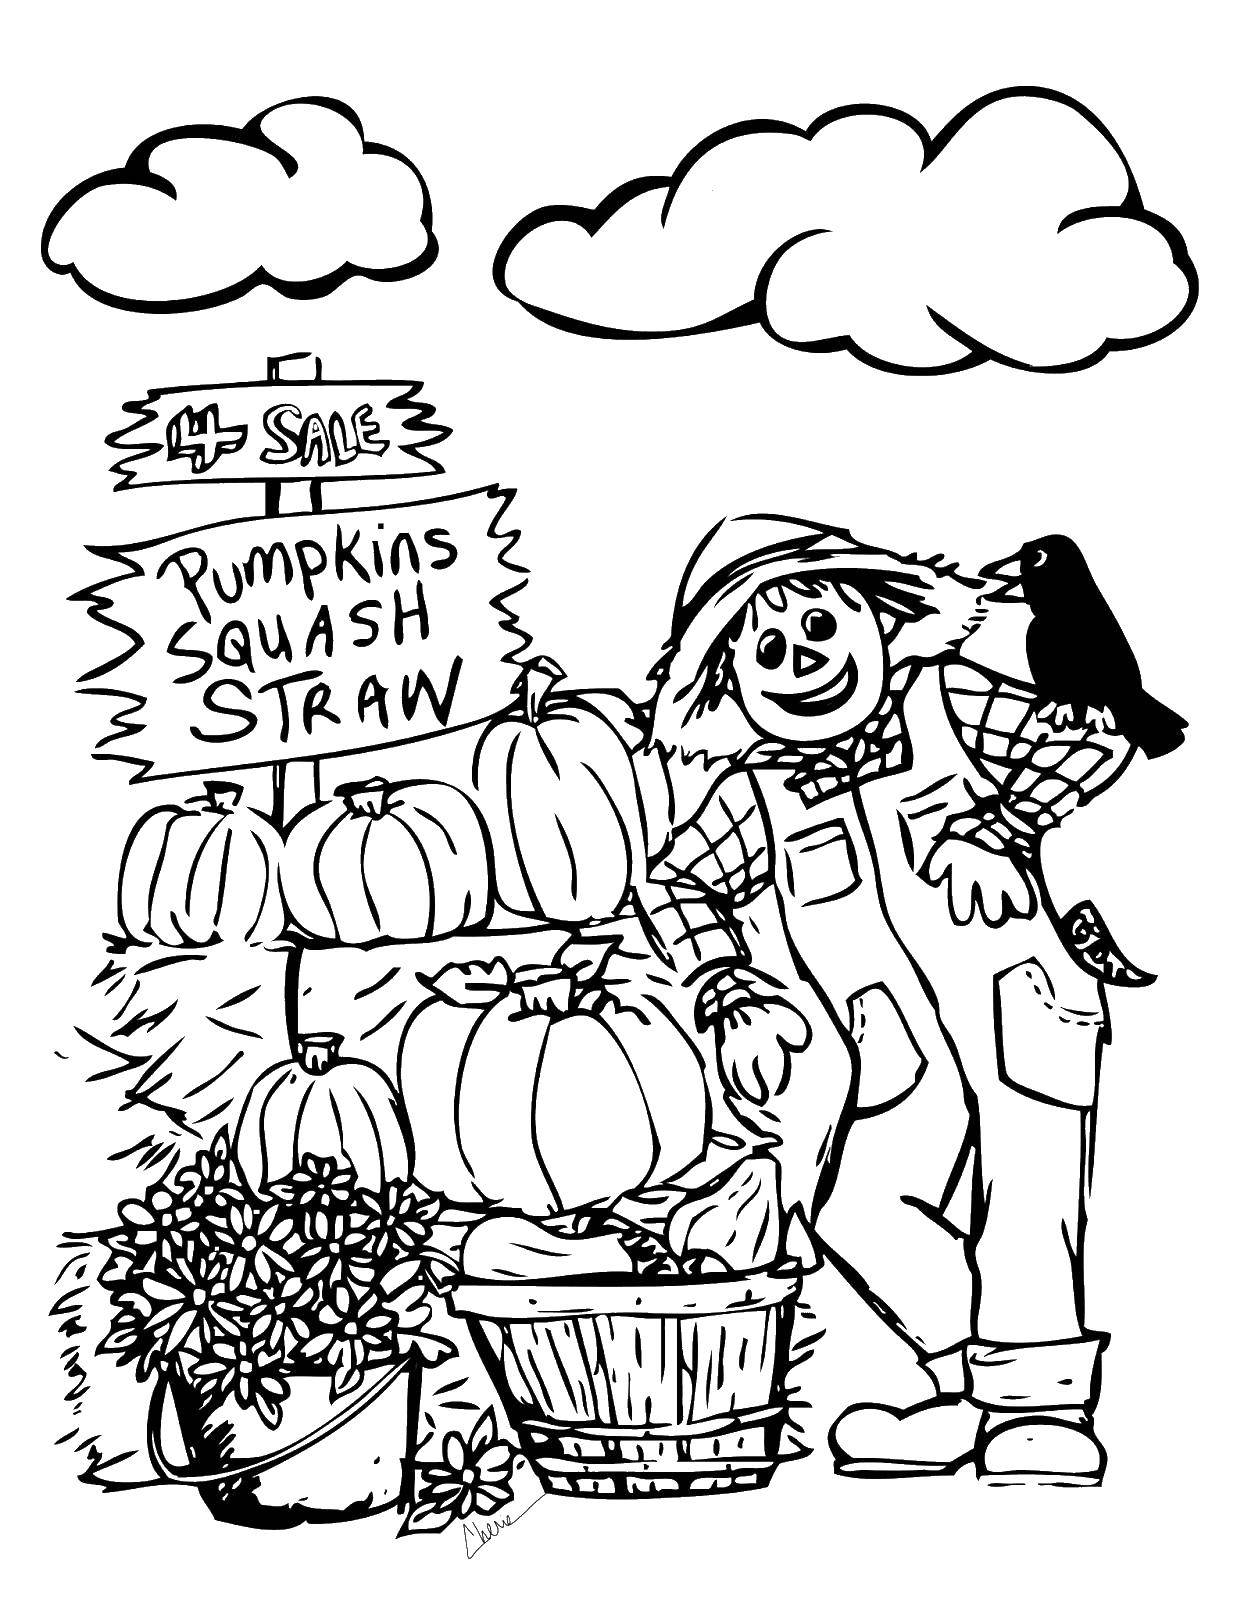 Coloring Scarecrow in the garden. Category Autumn. Tags:  Scarecrow, pegalo, harvest.